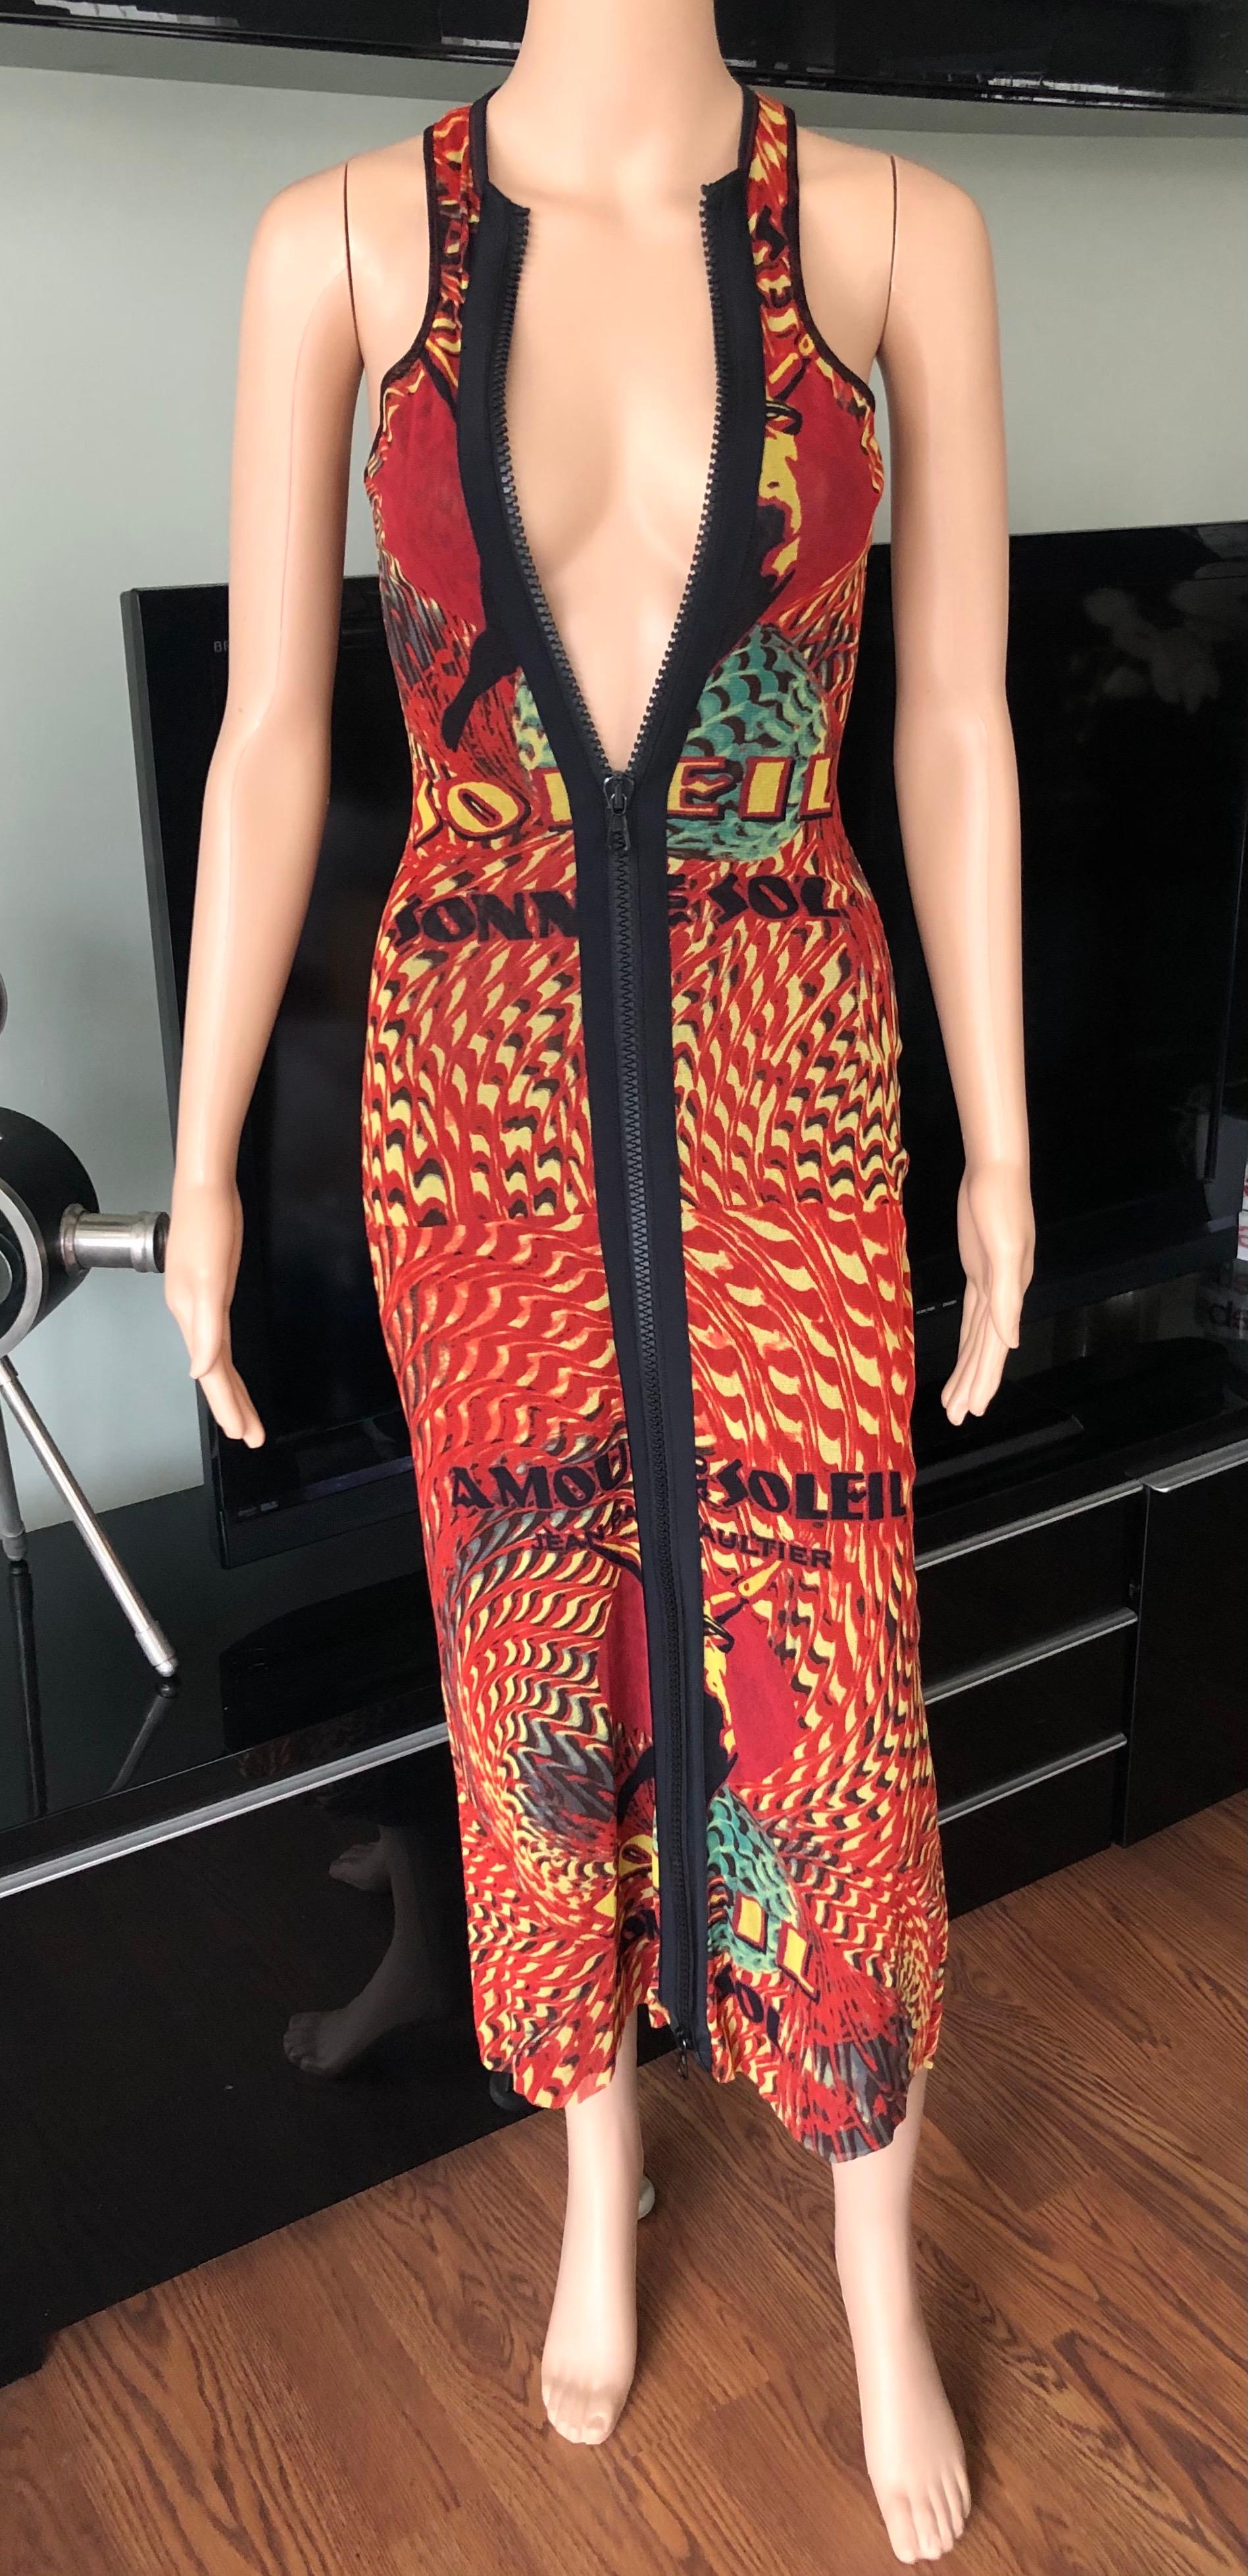 Jean Paul Gaultier Soleil Vintage Amour au Soleil Bodycon Mesh Maxi Dress Size S

Excellent Condition

Jean Paul Gaultier Soleil Vintage Amour au Soleil dress featuring bodycon fit and exposed front zip closure ( can be adjusted to your preference).